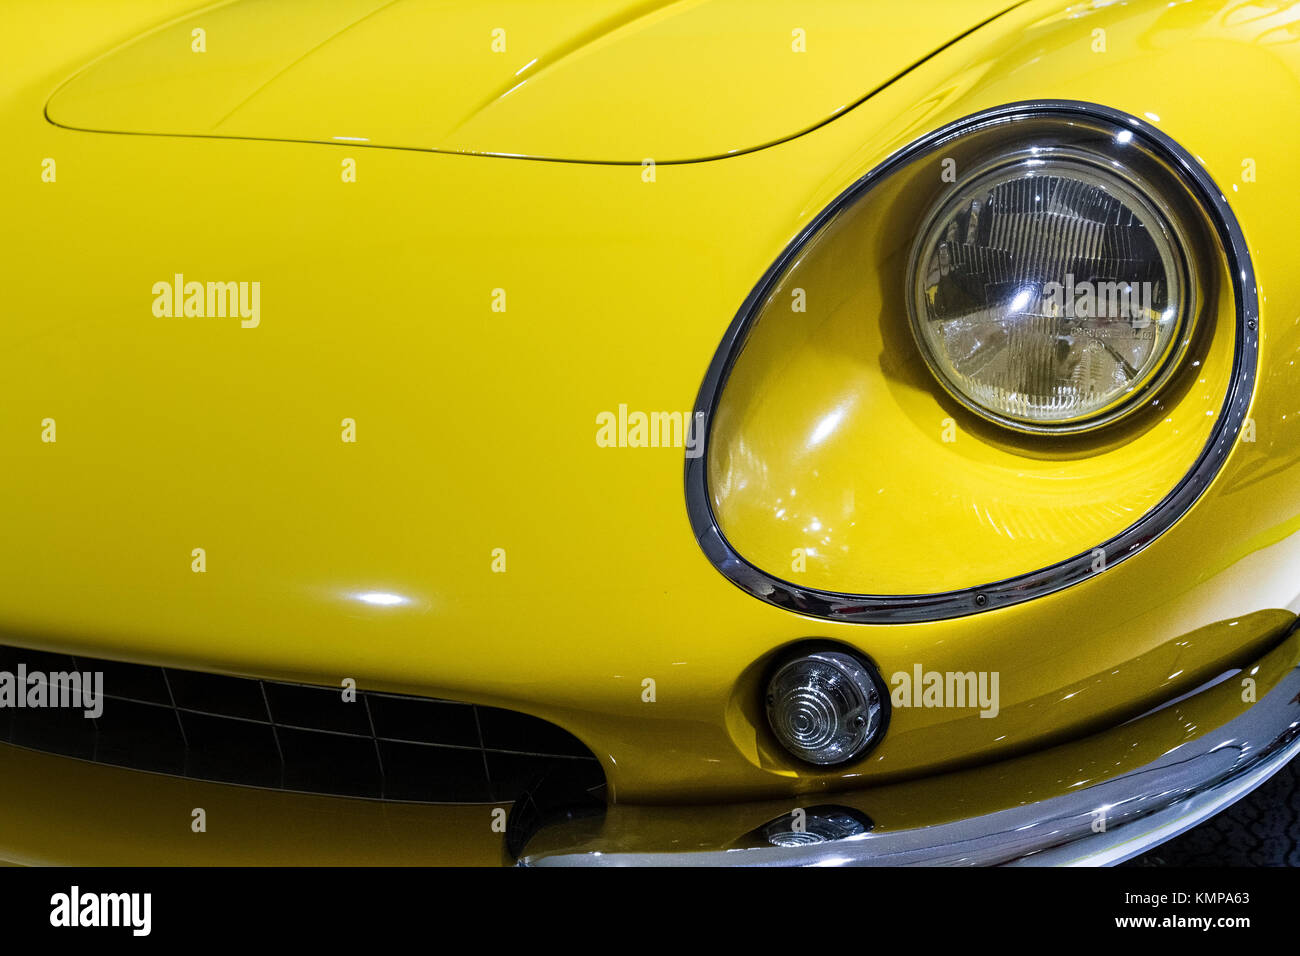 Bologna, BO, Italy - October 24, 2015: Detail of luxury sporty car duinng a vintage rally in Bologna  -- Body parts of a luxury sports car of yellow c Stock Photo